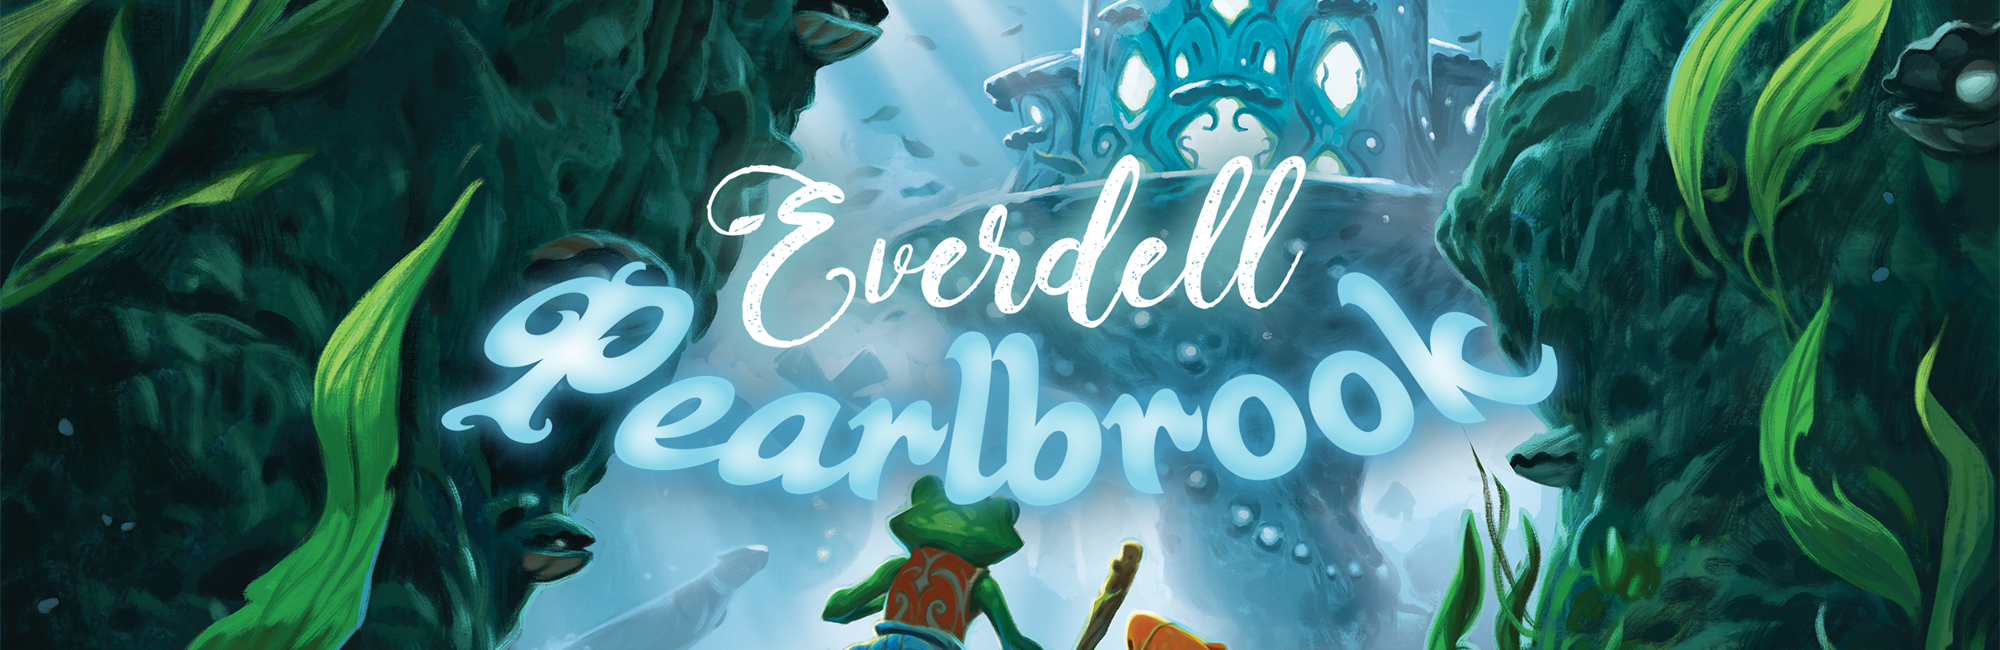 Everdell Pearlbrook expansion